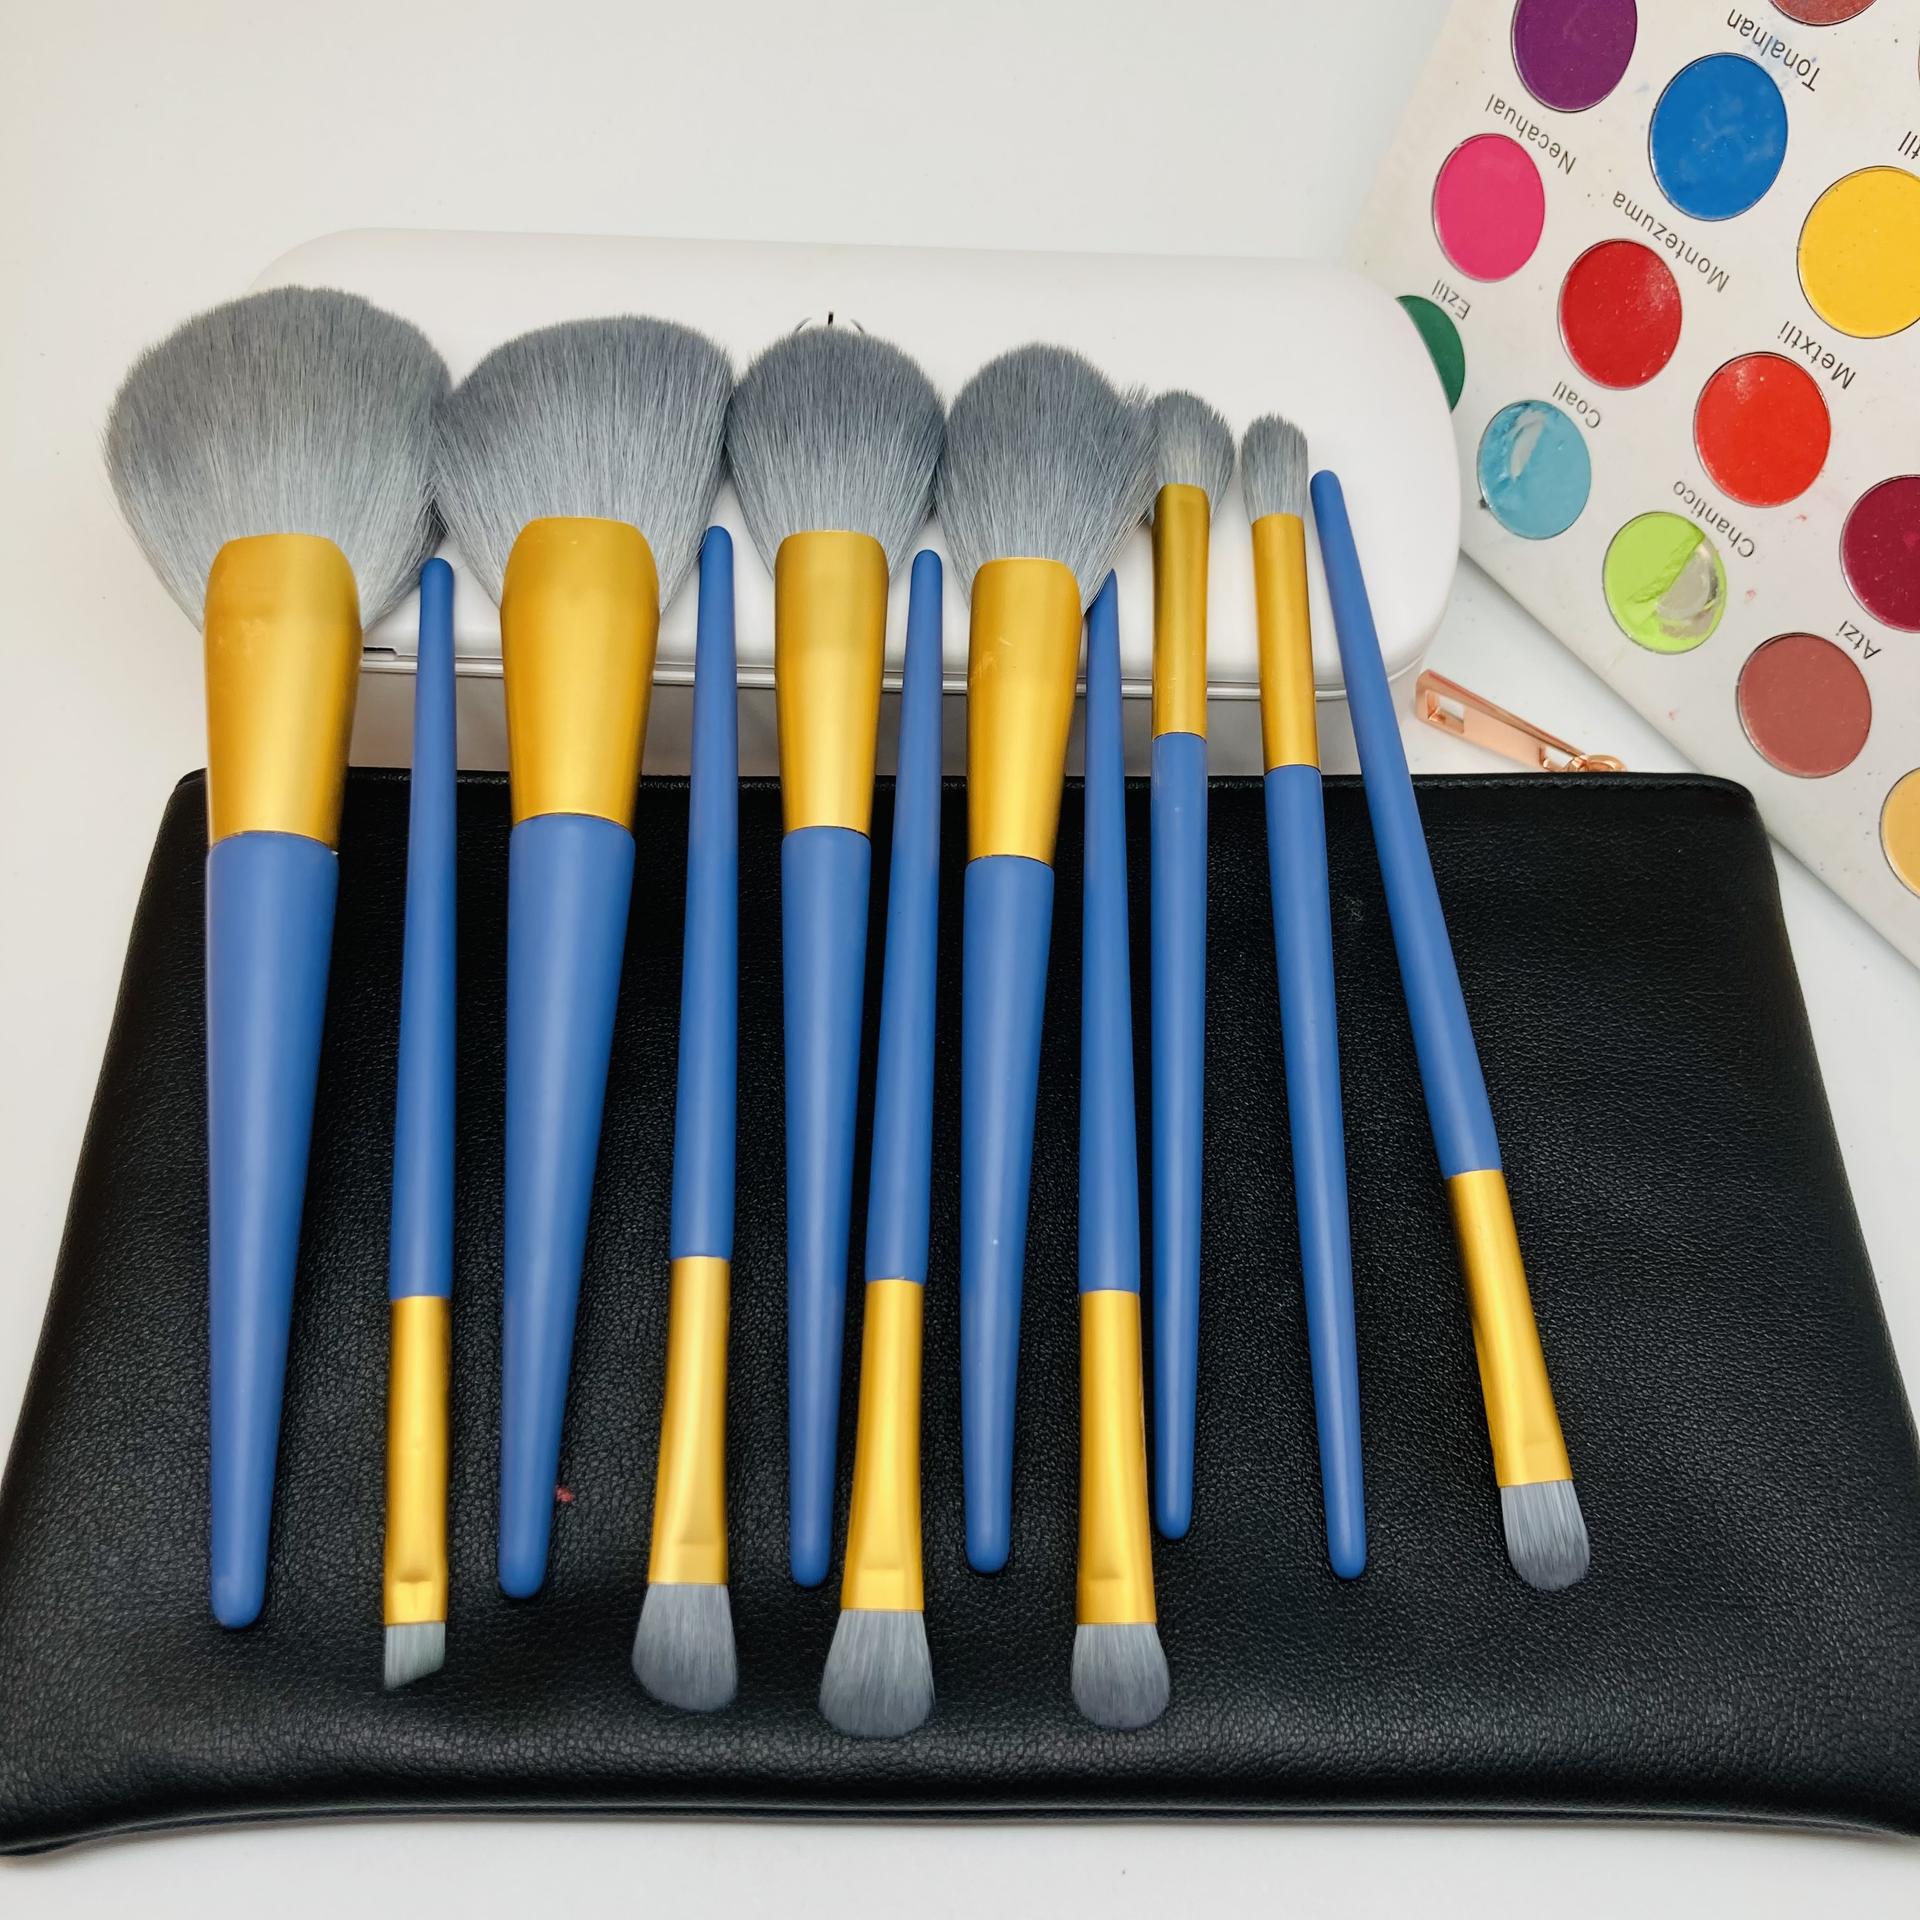 Makeup brush private label set with sterilized box vegan eyeshadow professional makeup brushes